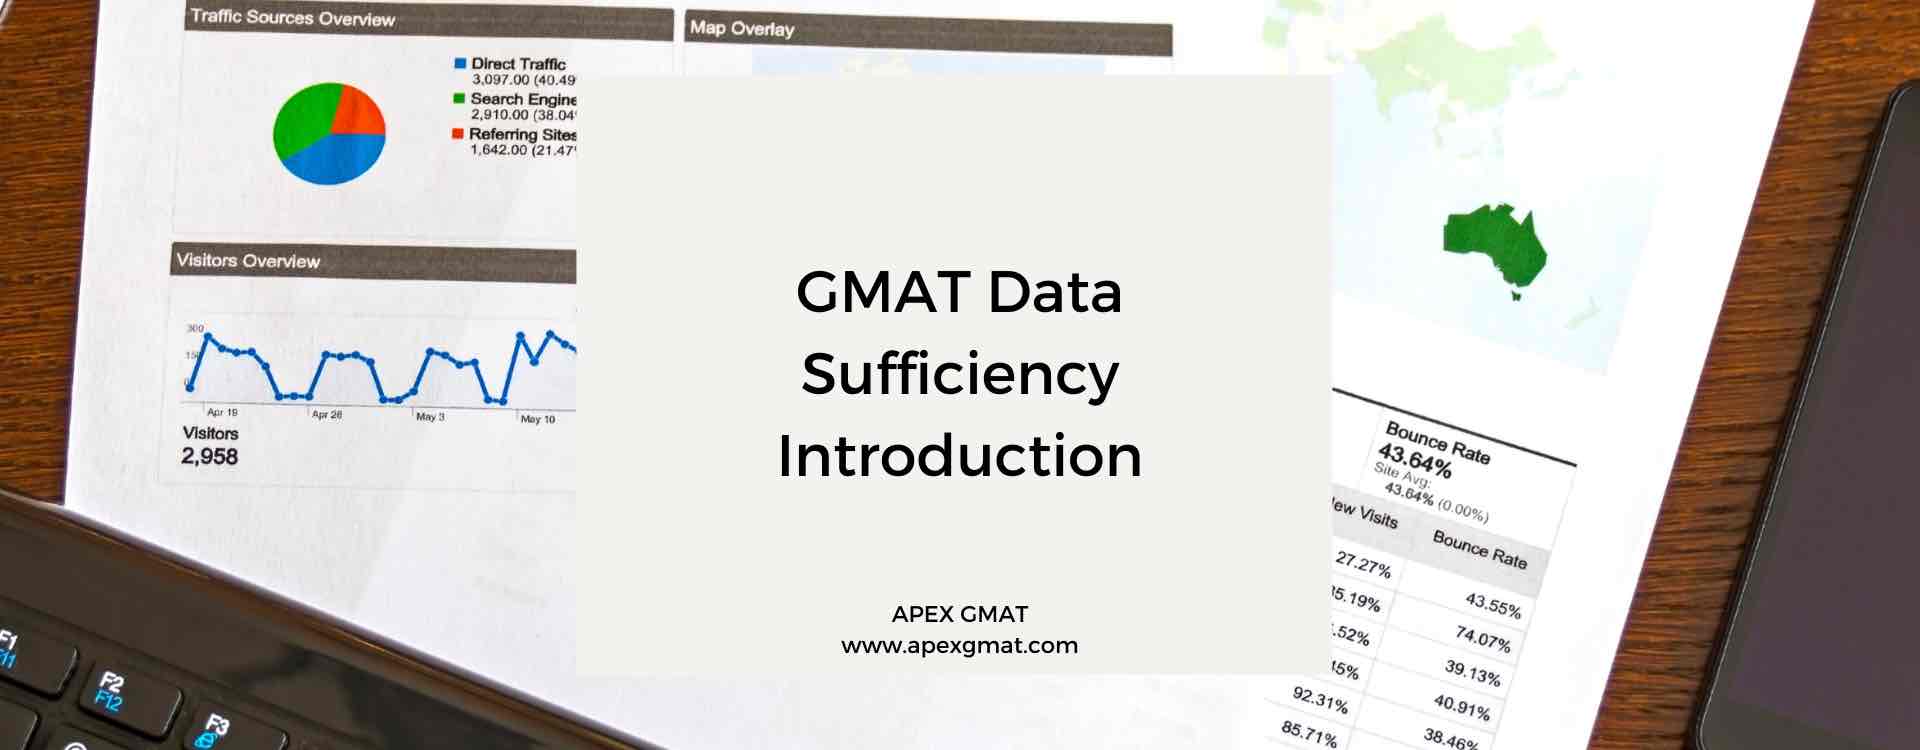 GMAT Data Sufficiency Introduction